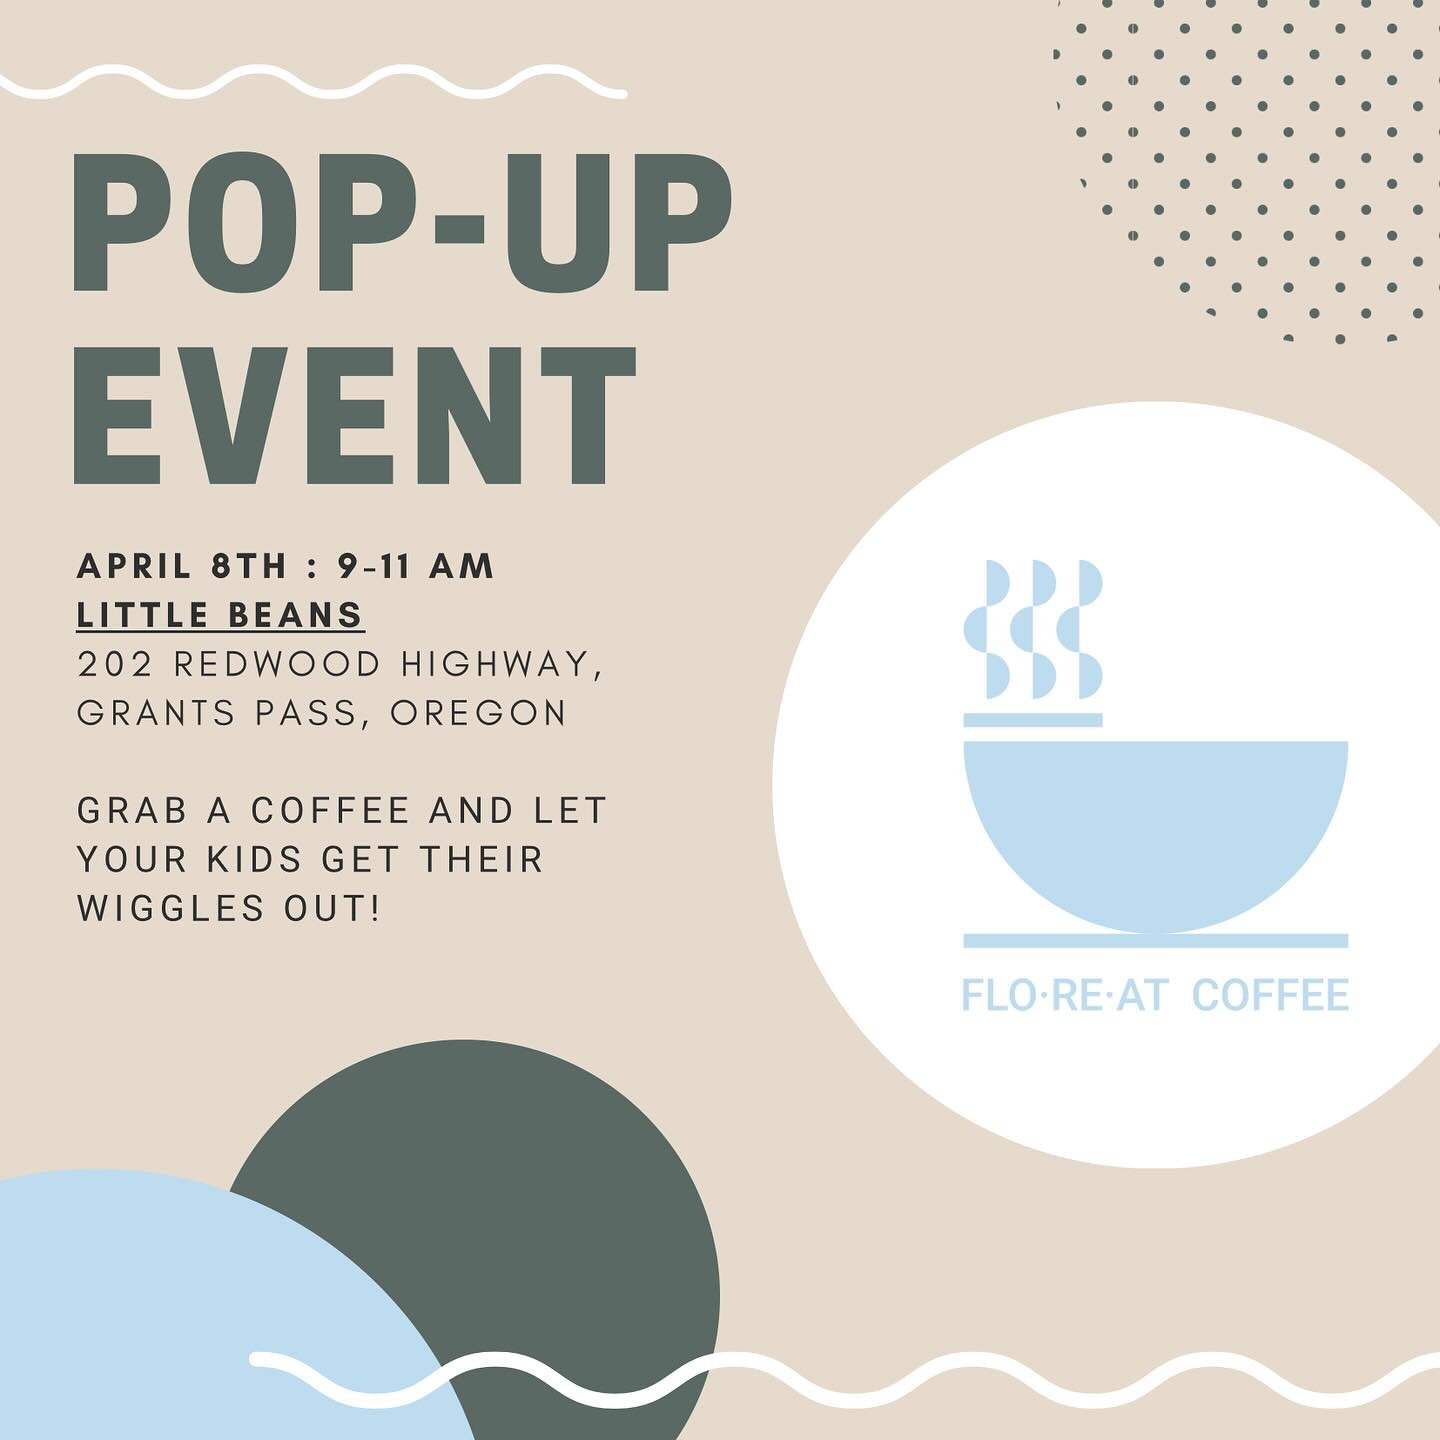 All you parents out there, we know Mondays can be tough. But start your week with something fun! Come out to @littlebeansgp on Monday April 8th. Grab a coffee and let your kids play freely in this awesome new space! 

We also will be there the first 